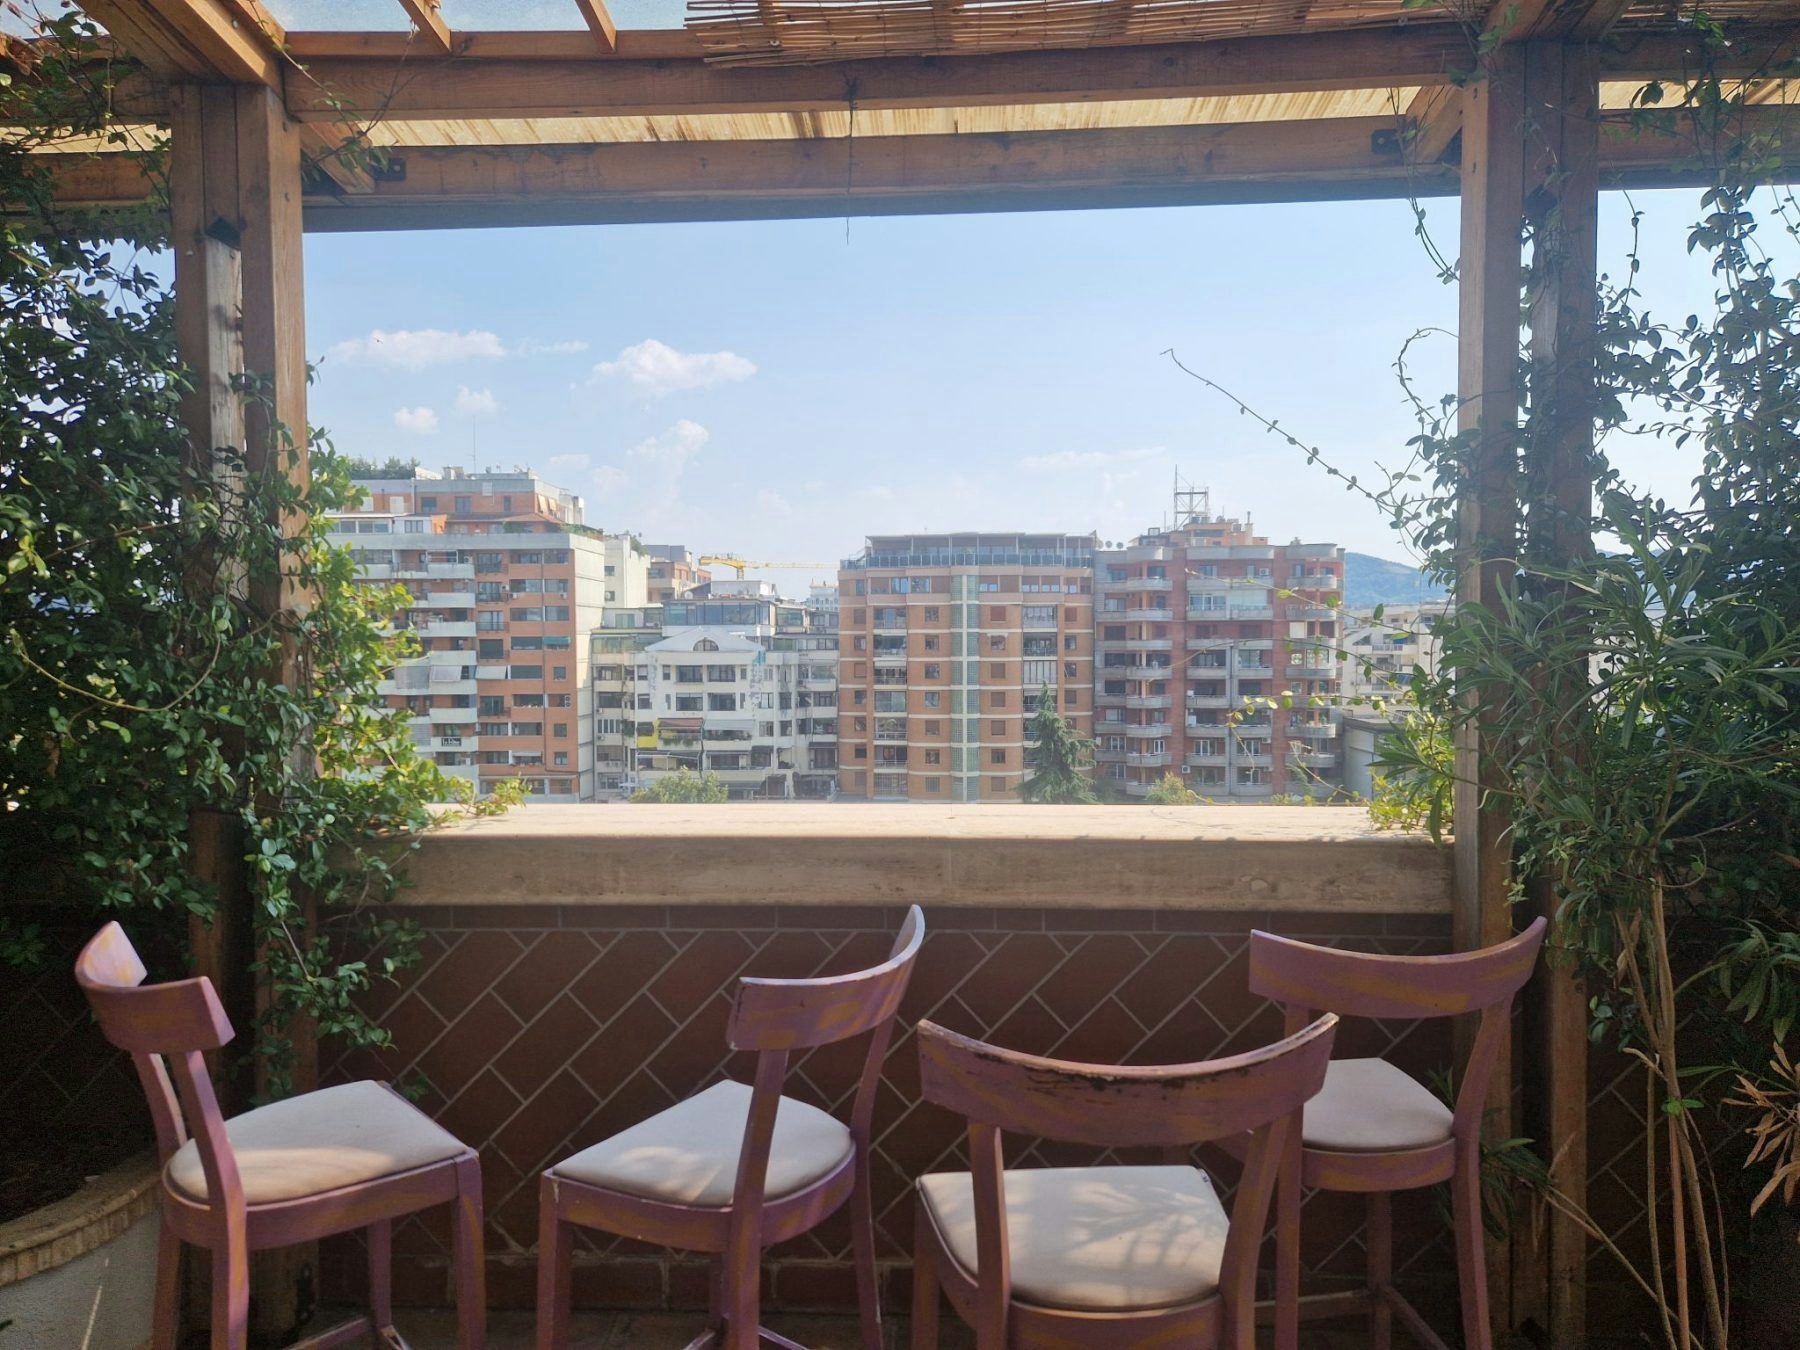 Four chairs on a balcony overlooking a city. Plants are on either side. 